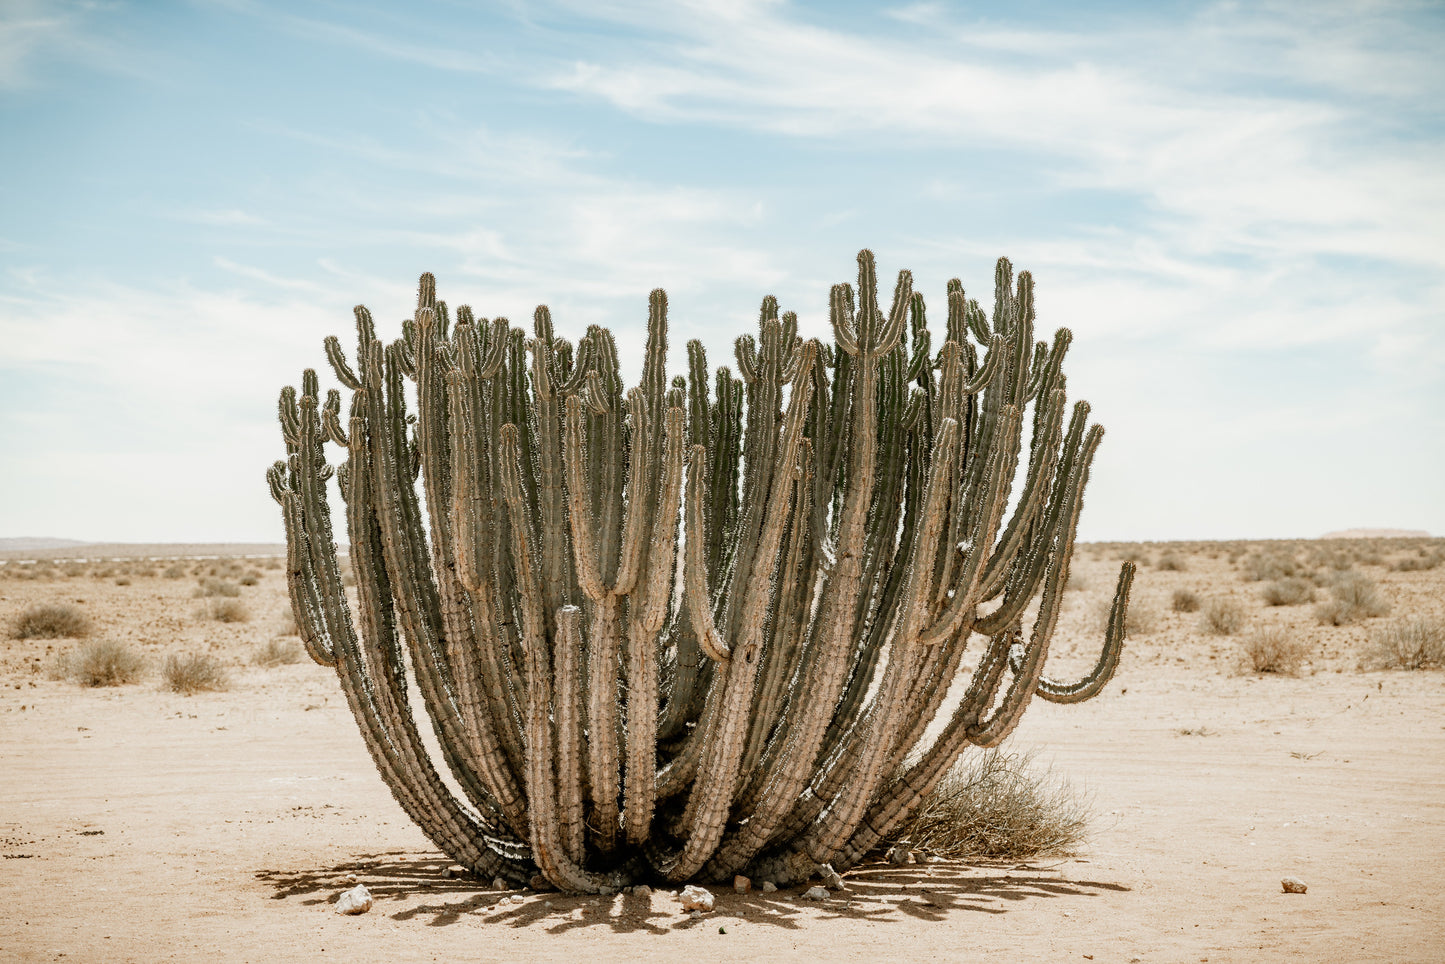 The Cursed Plant of Namibia